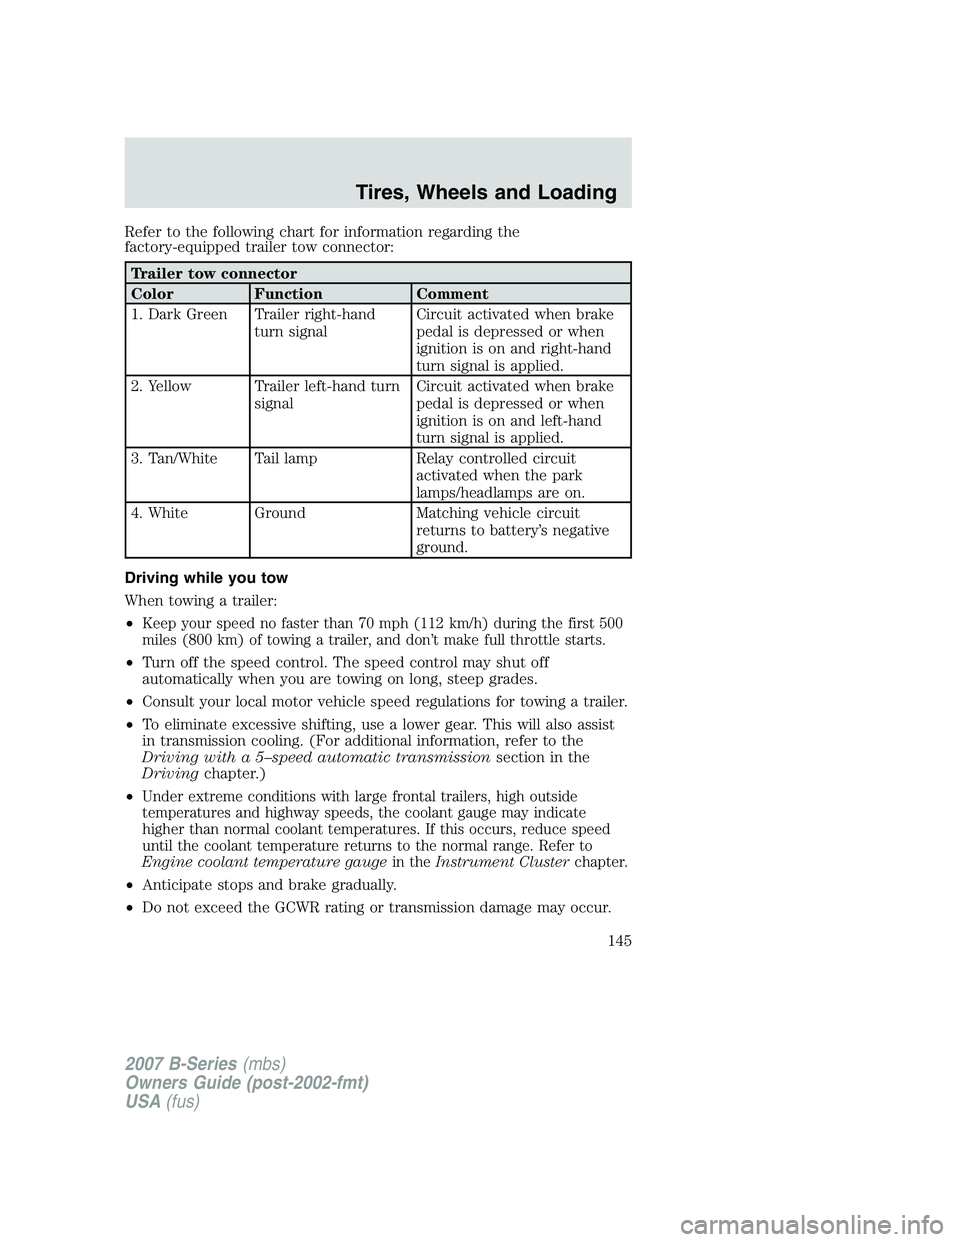 MAZDA MODEL B3000 TRUCK 2007  Owners Manual Refer to the following chart for information regarding the
factory-equipped trailer tow connector:
Trailer tow connector
ColorFunction Comment
1. Dark Green Trailer right-hand turn signal Circuit acti